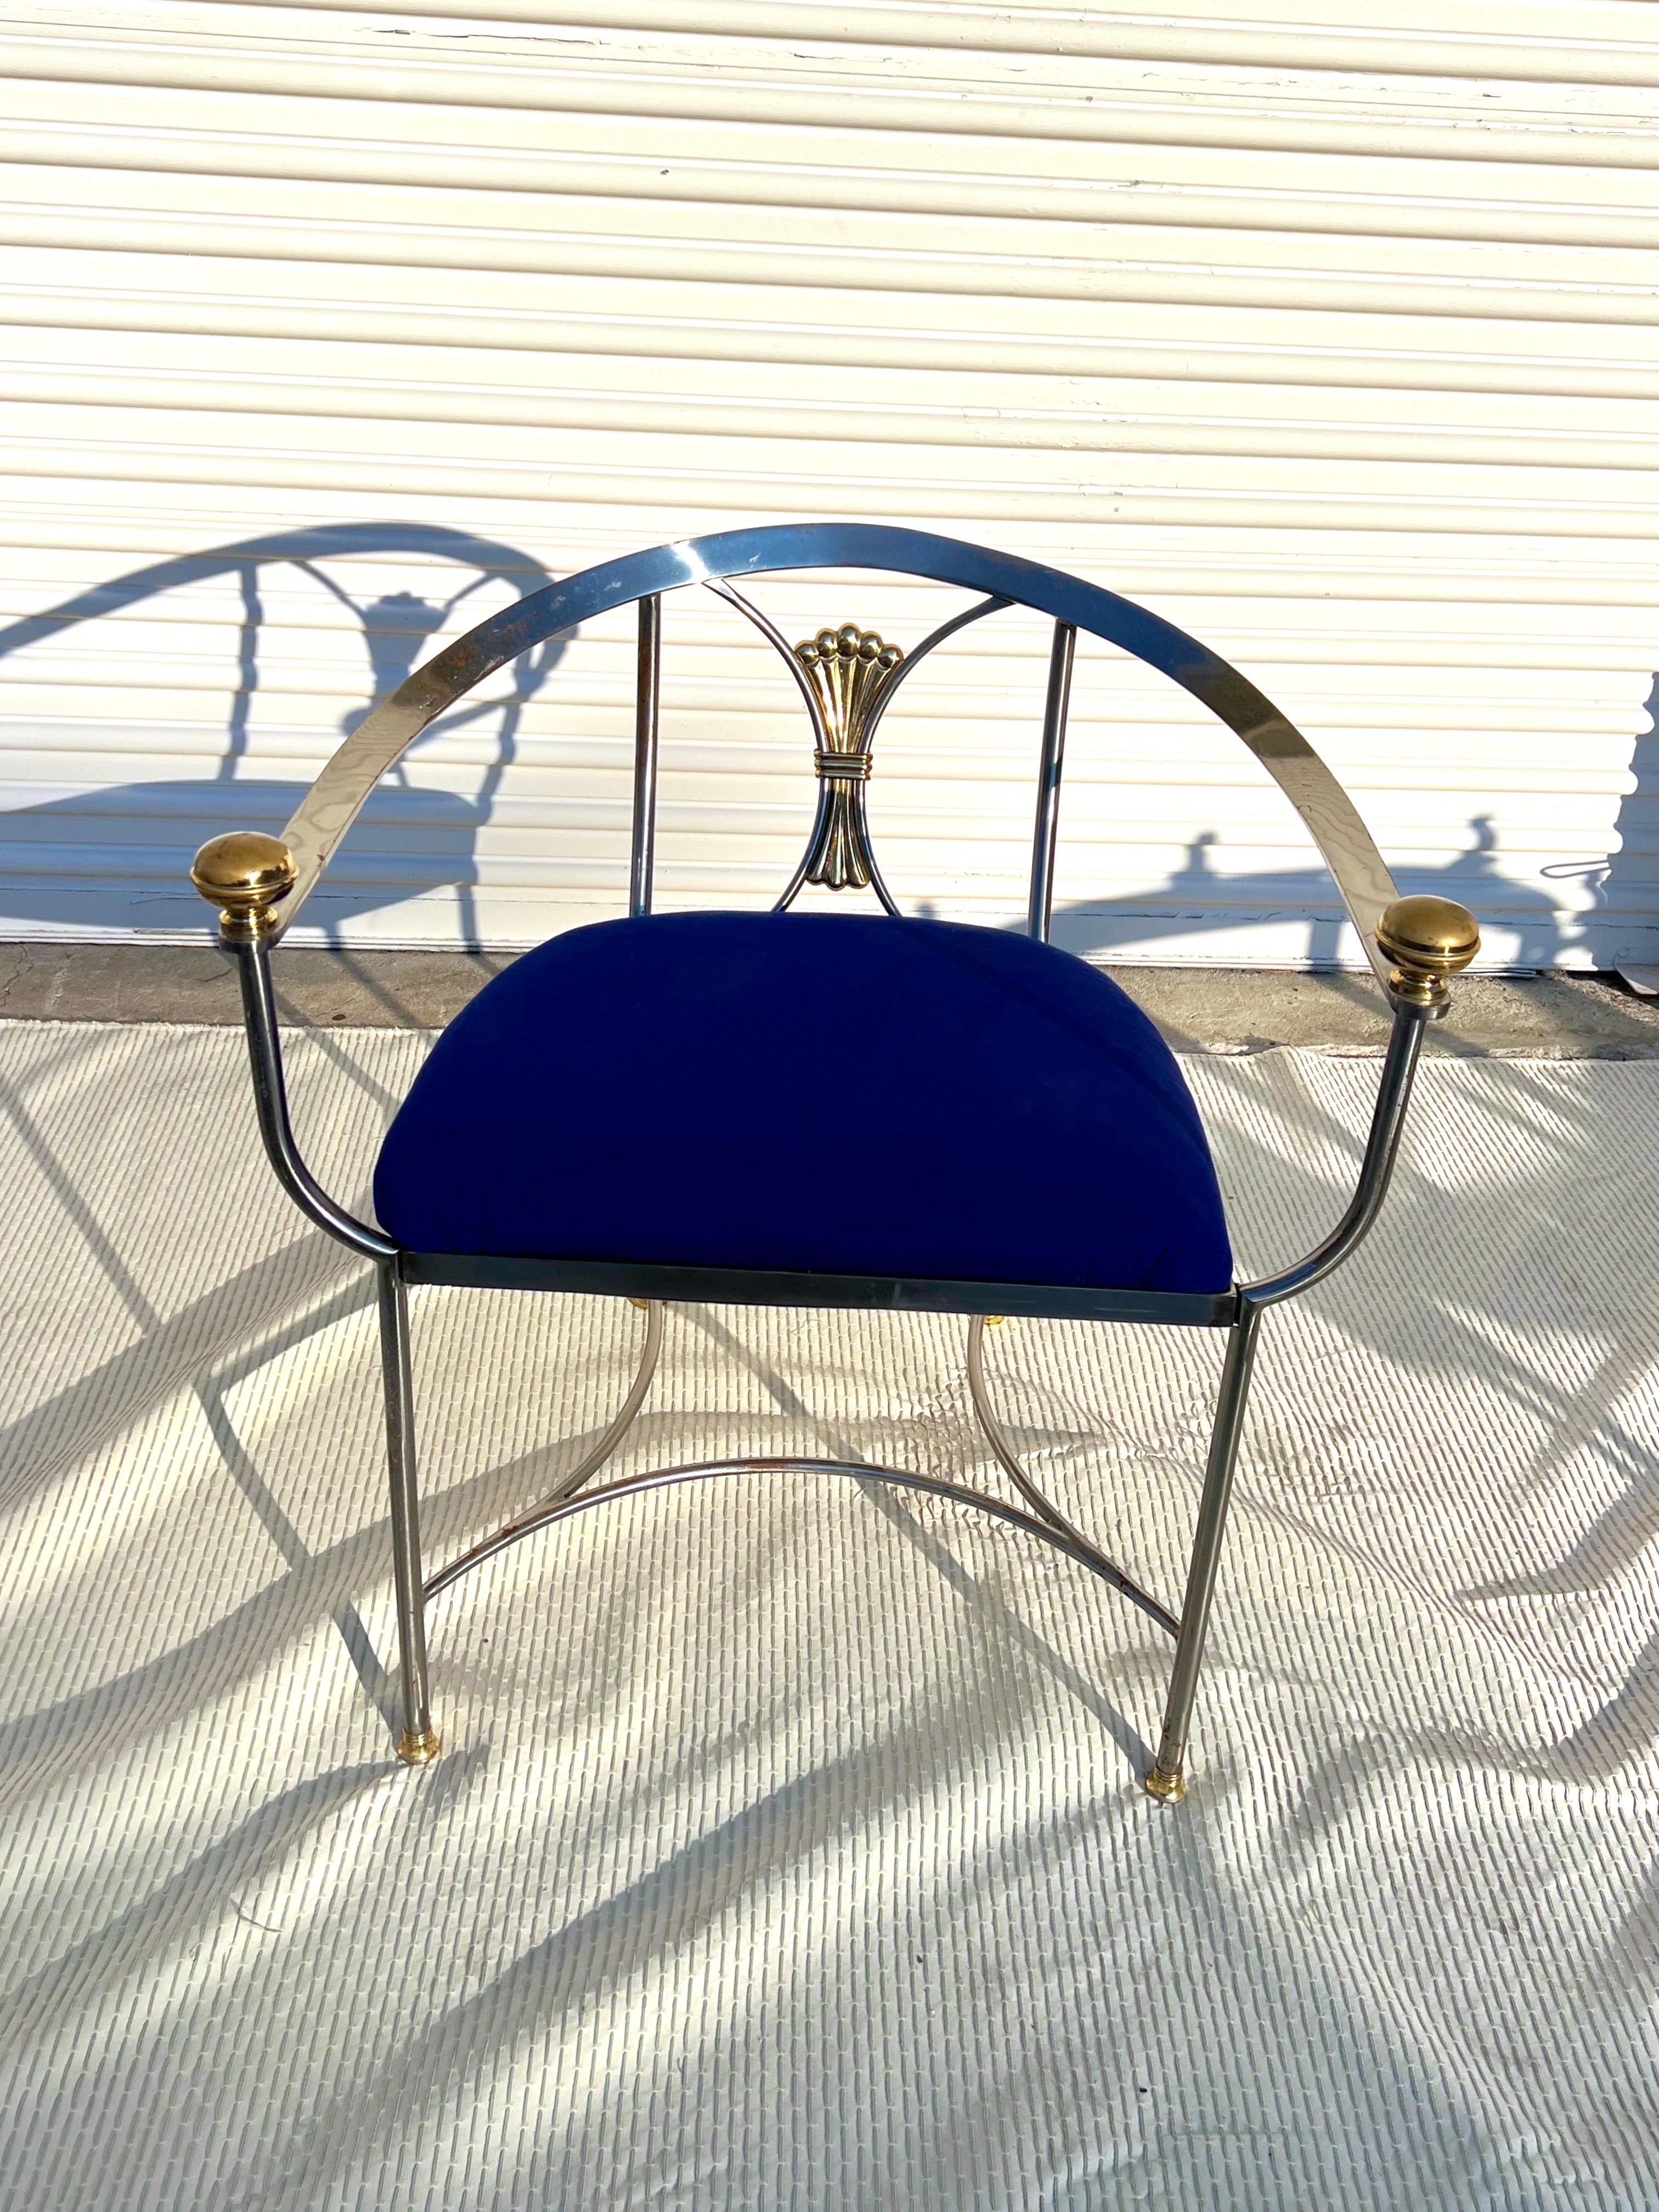 Alberto Orlandi occasional chair. , Italian Renaissance-revival Savonarola chair with sculptural polished metal and solid brass decorative details. New webbing and foam has been added.  Blue canvas fabric is just a placeholder so that you can